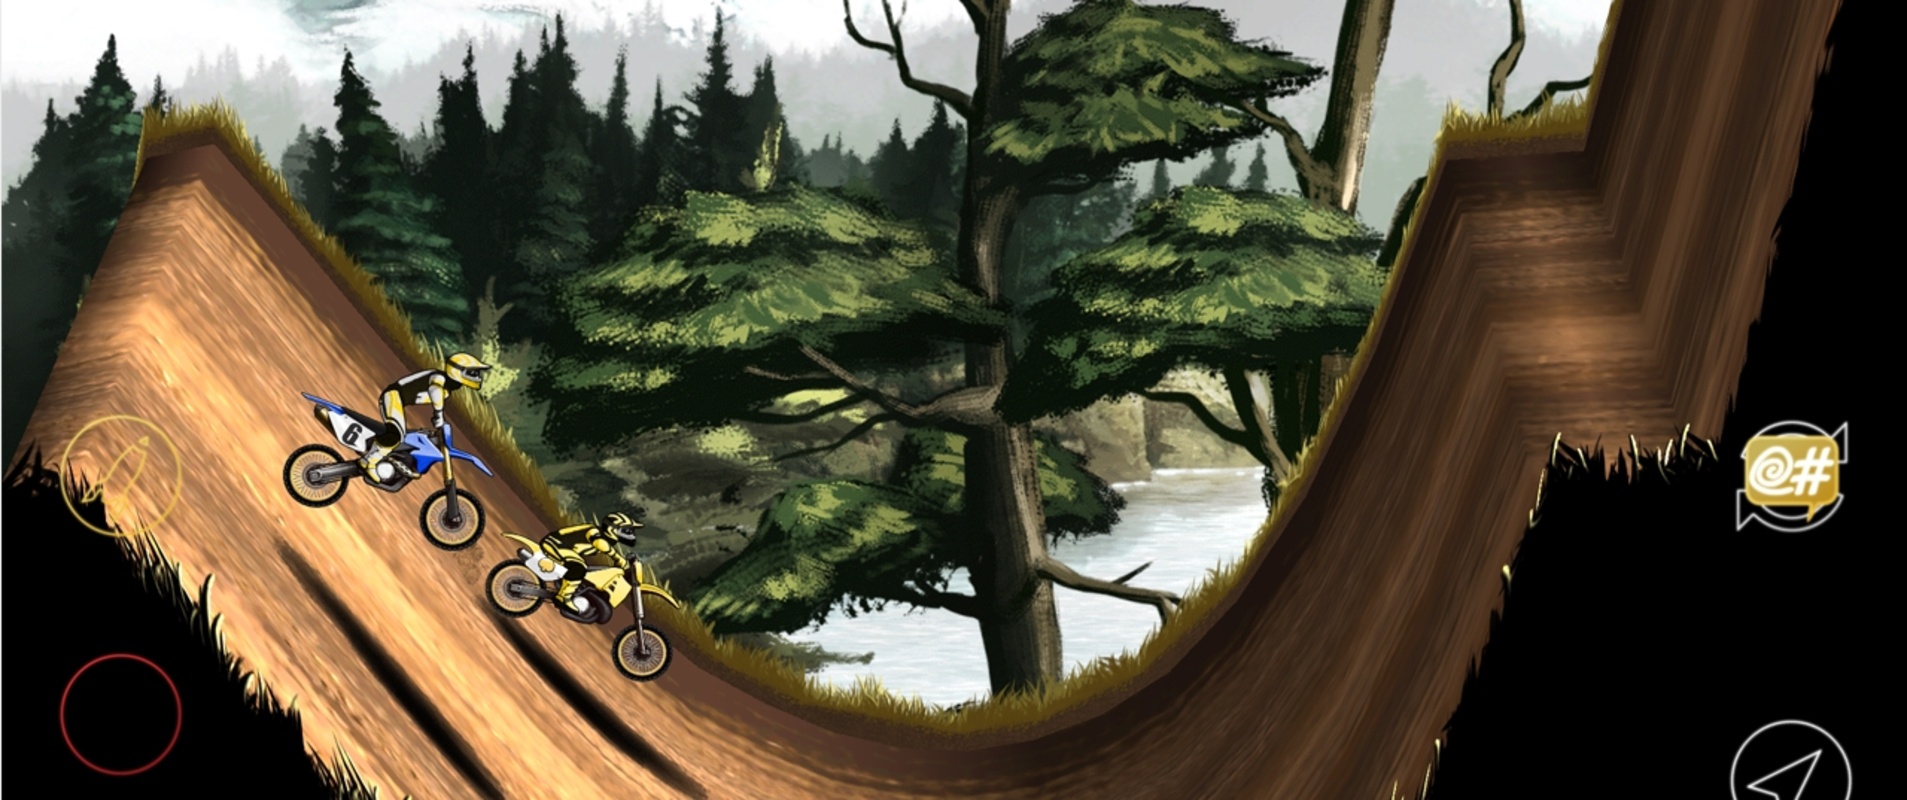 Mad Skills Motocross 2 2.35.4543 APK for Android Screenshot 4